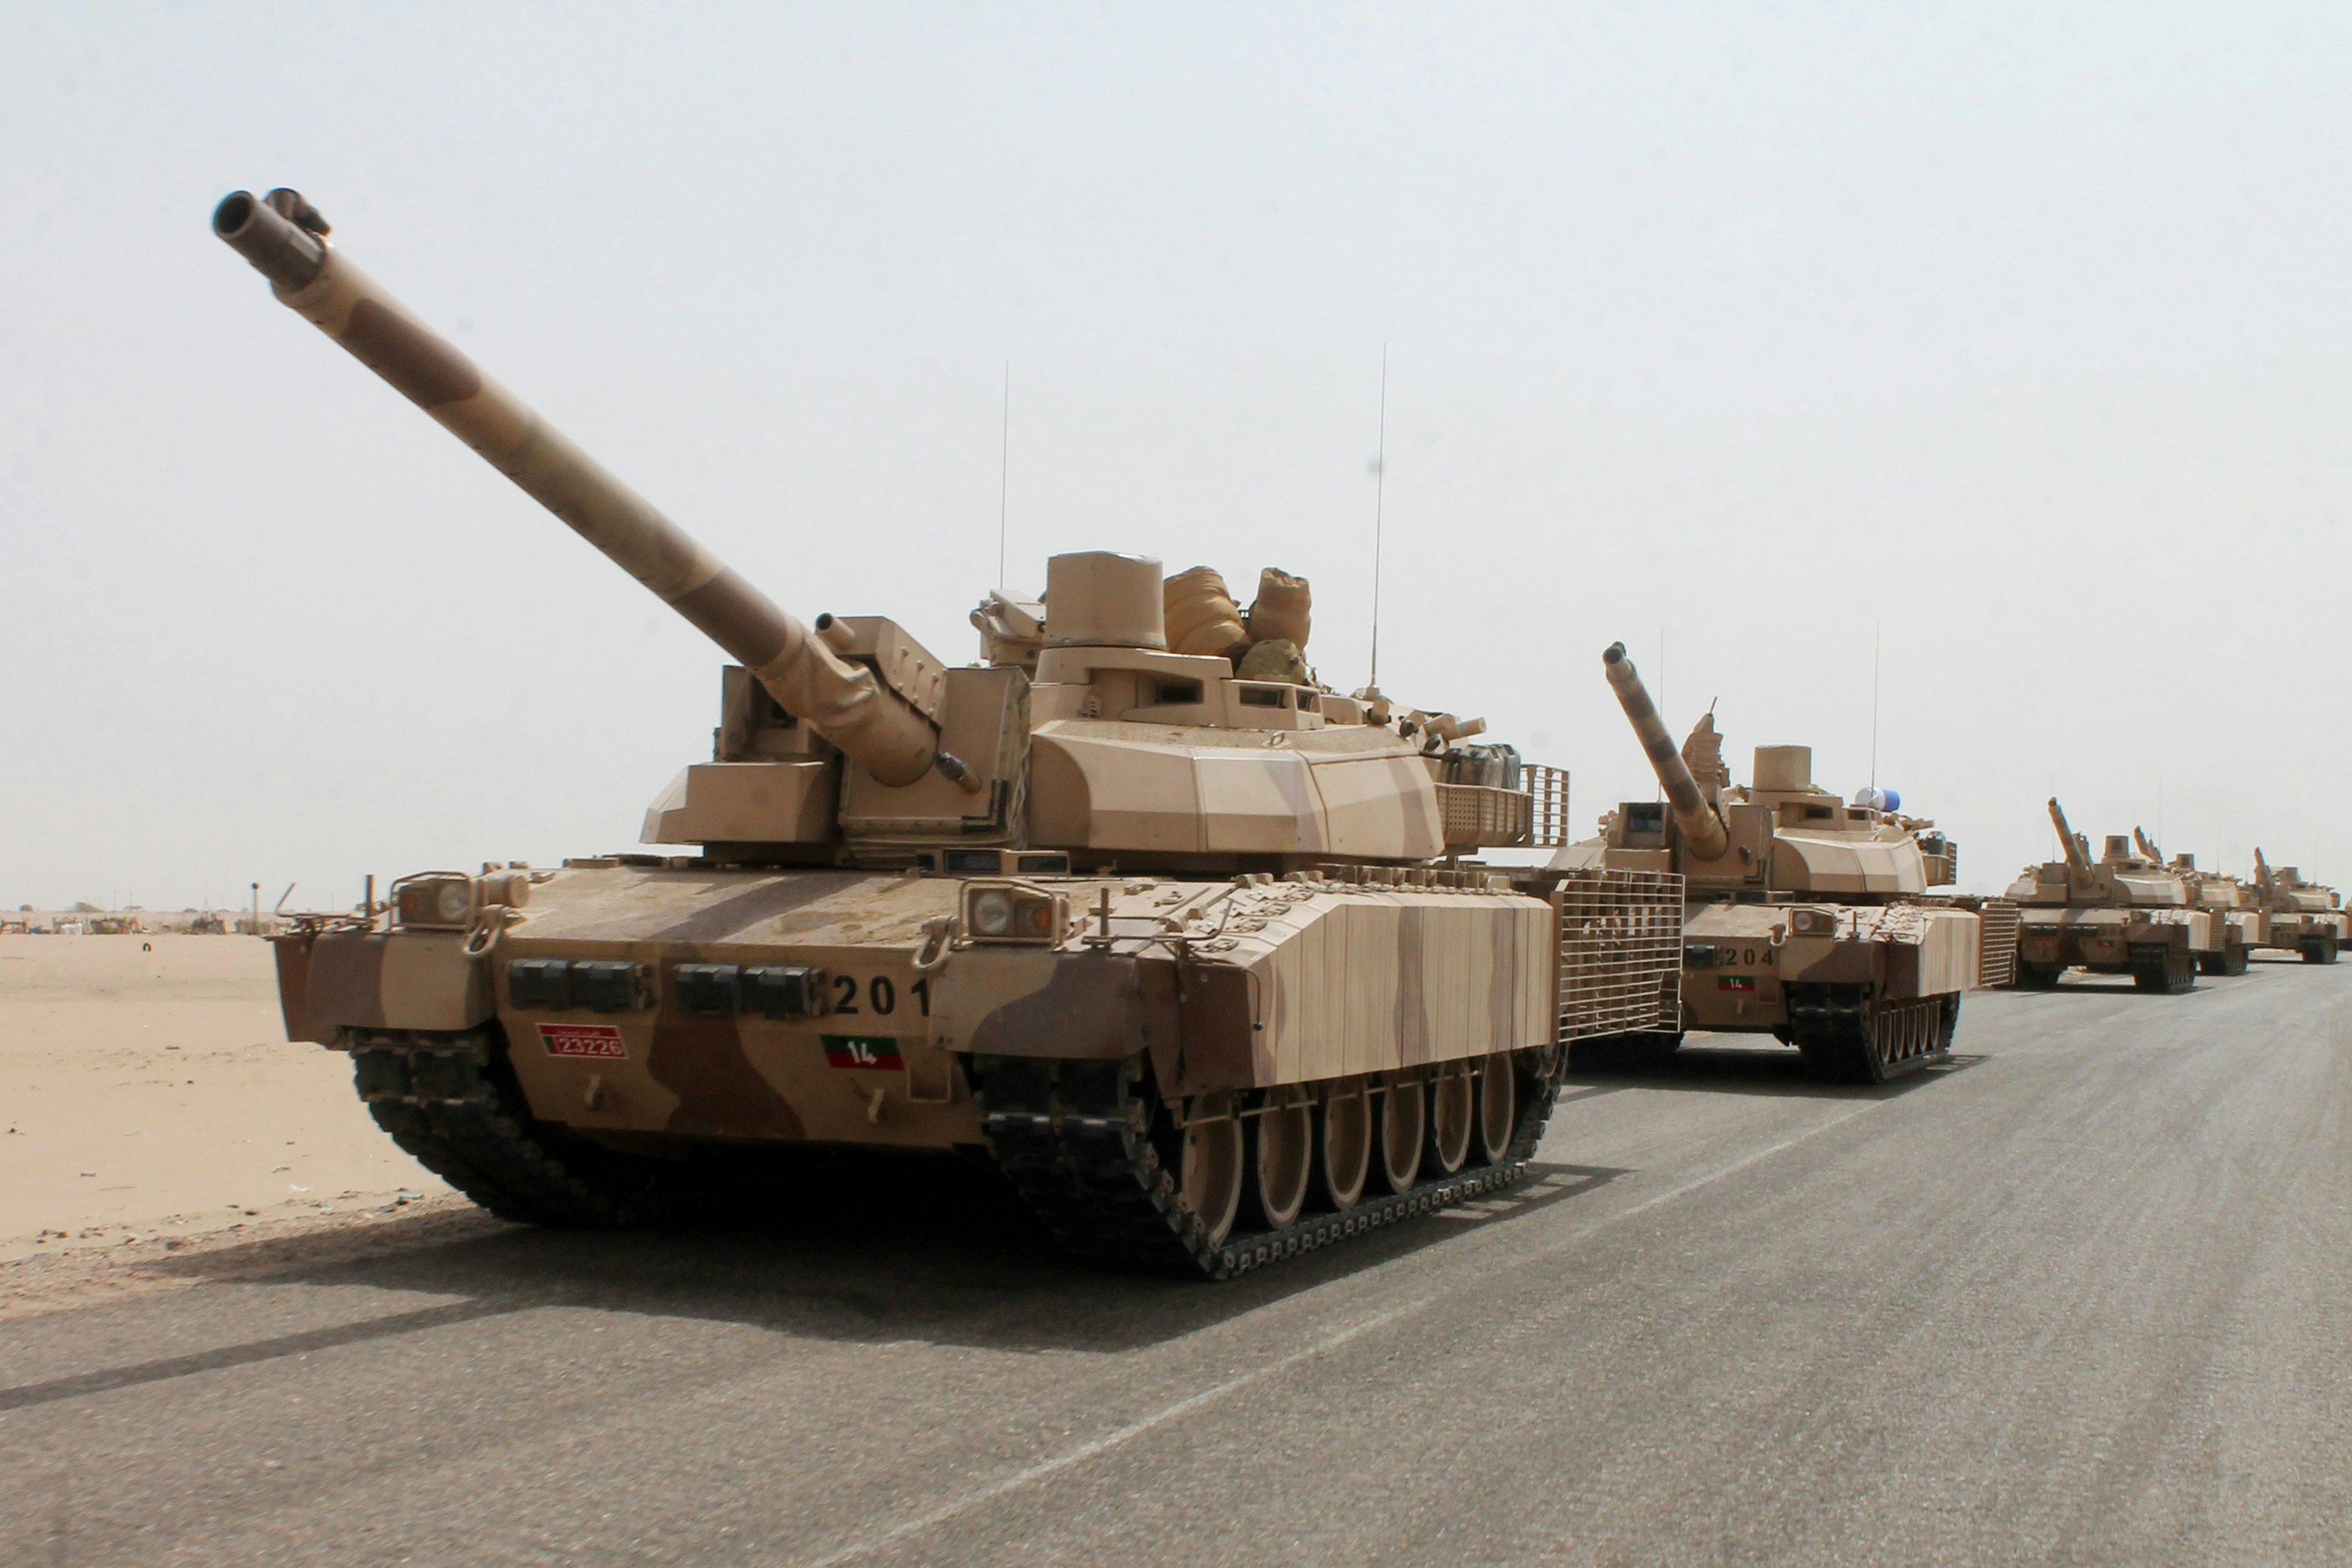 French-made Leclerc tanks of the Saudi-led coalition are deployed on the outskirts of the southern Yemeni port city of Aden on August 3, 2015, during a military operation against Shiite Huthi rebels and their allies. Pro-government forces backed by a Saudi-led coalition retook Yemen's biggest airbase from Iran-backed rebels in a significant new gain after their recapture of second city Aden last month. AFP PHOTO / SALEH AL-OBEIDI        (Photo credit should read SALEH AL-OBEIDI/AFP/Getty Images)